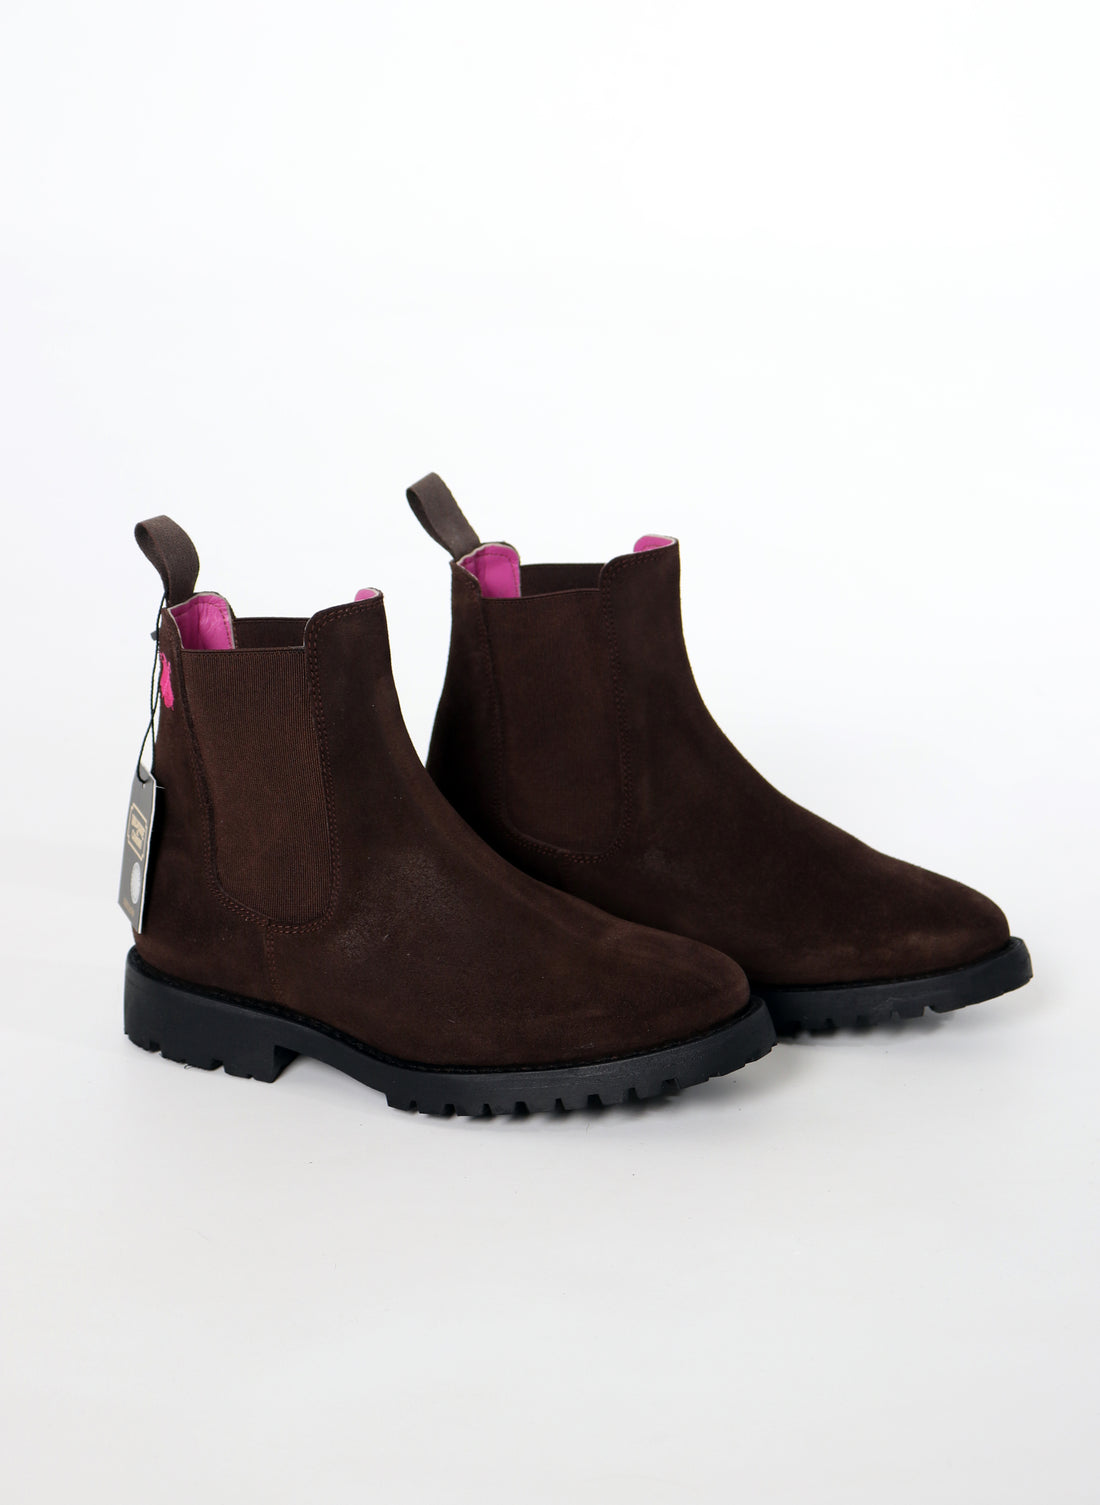 Femme ankle boots in chocolate brown nubuck